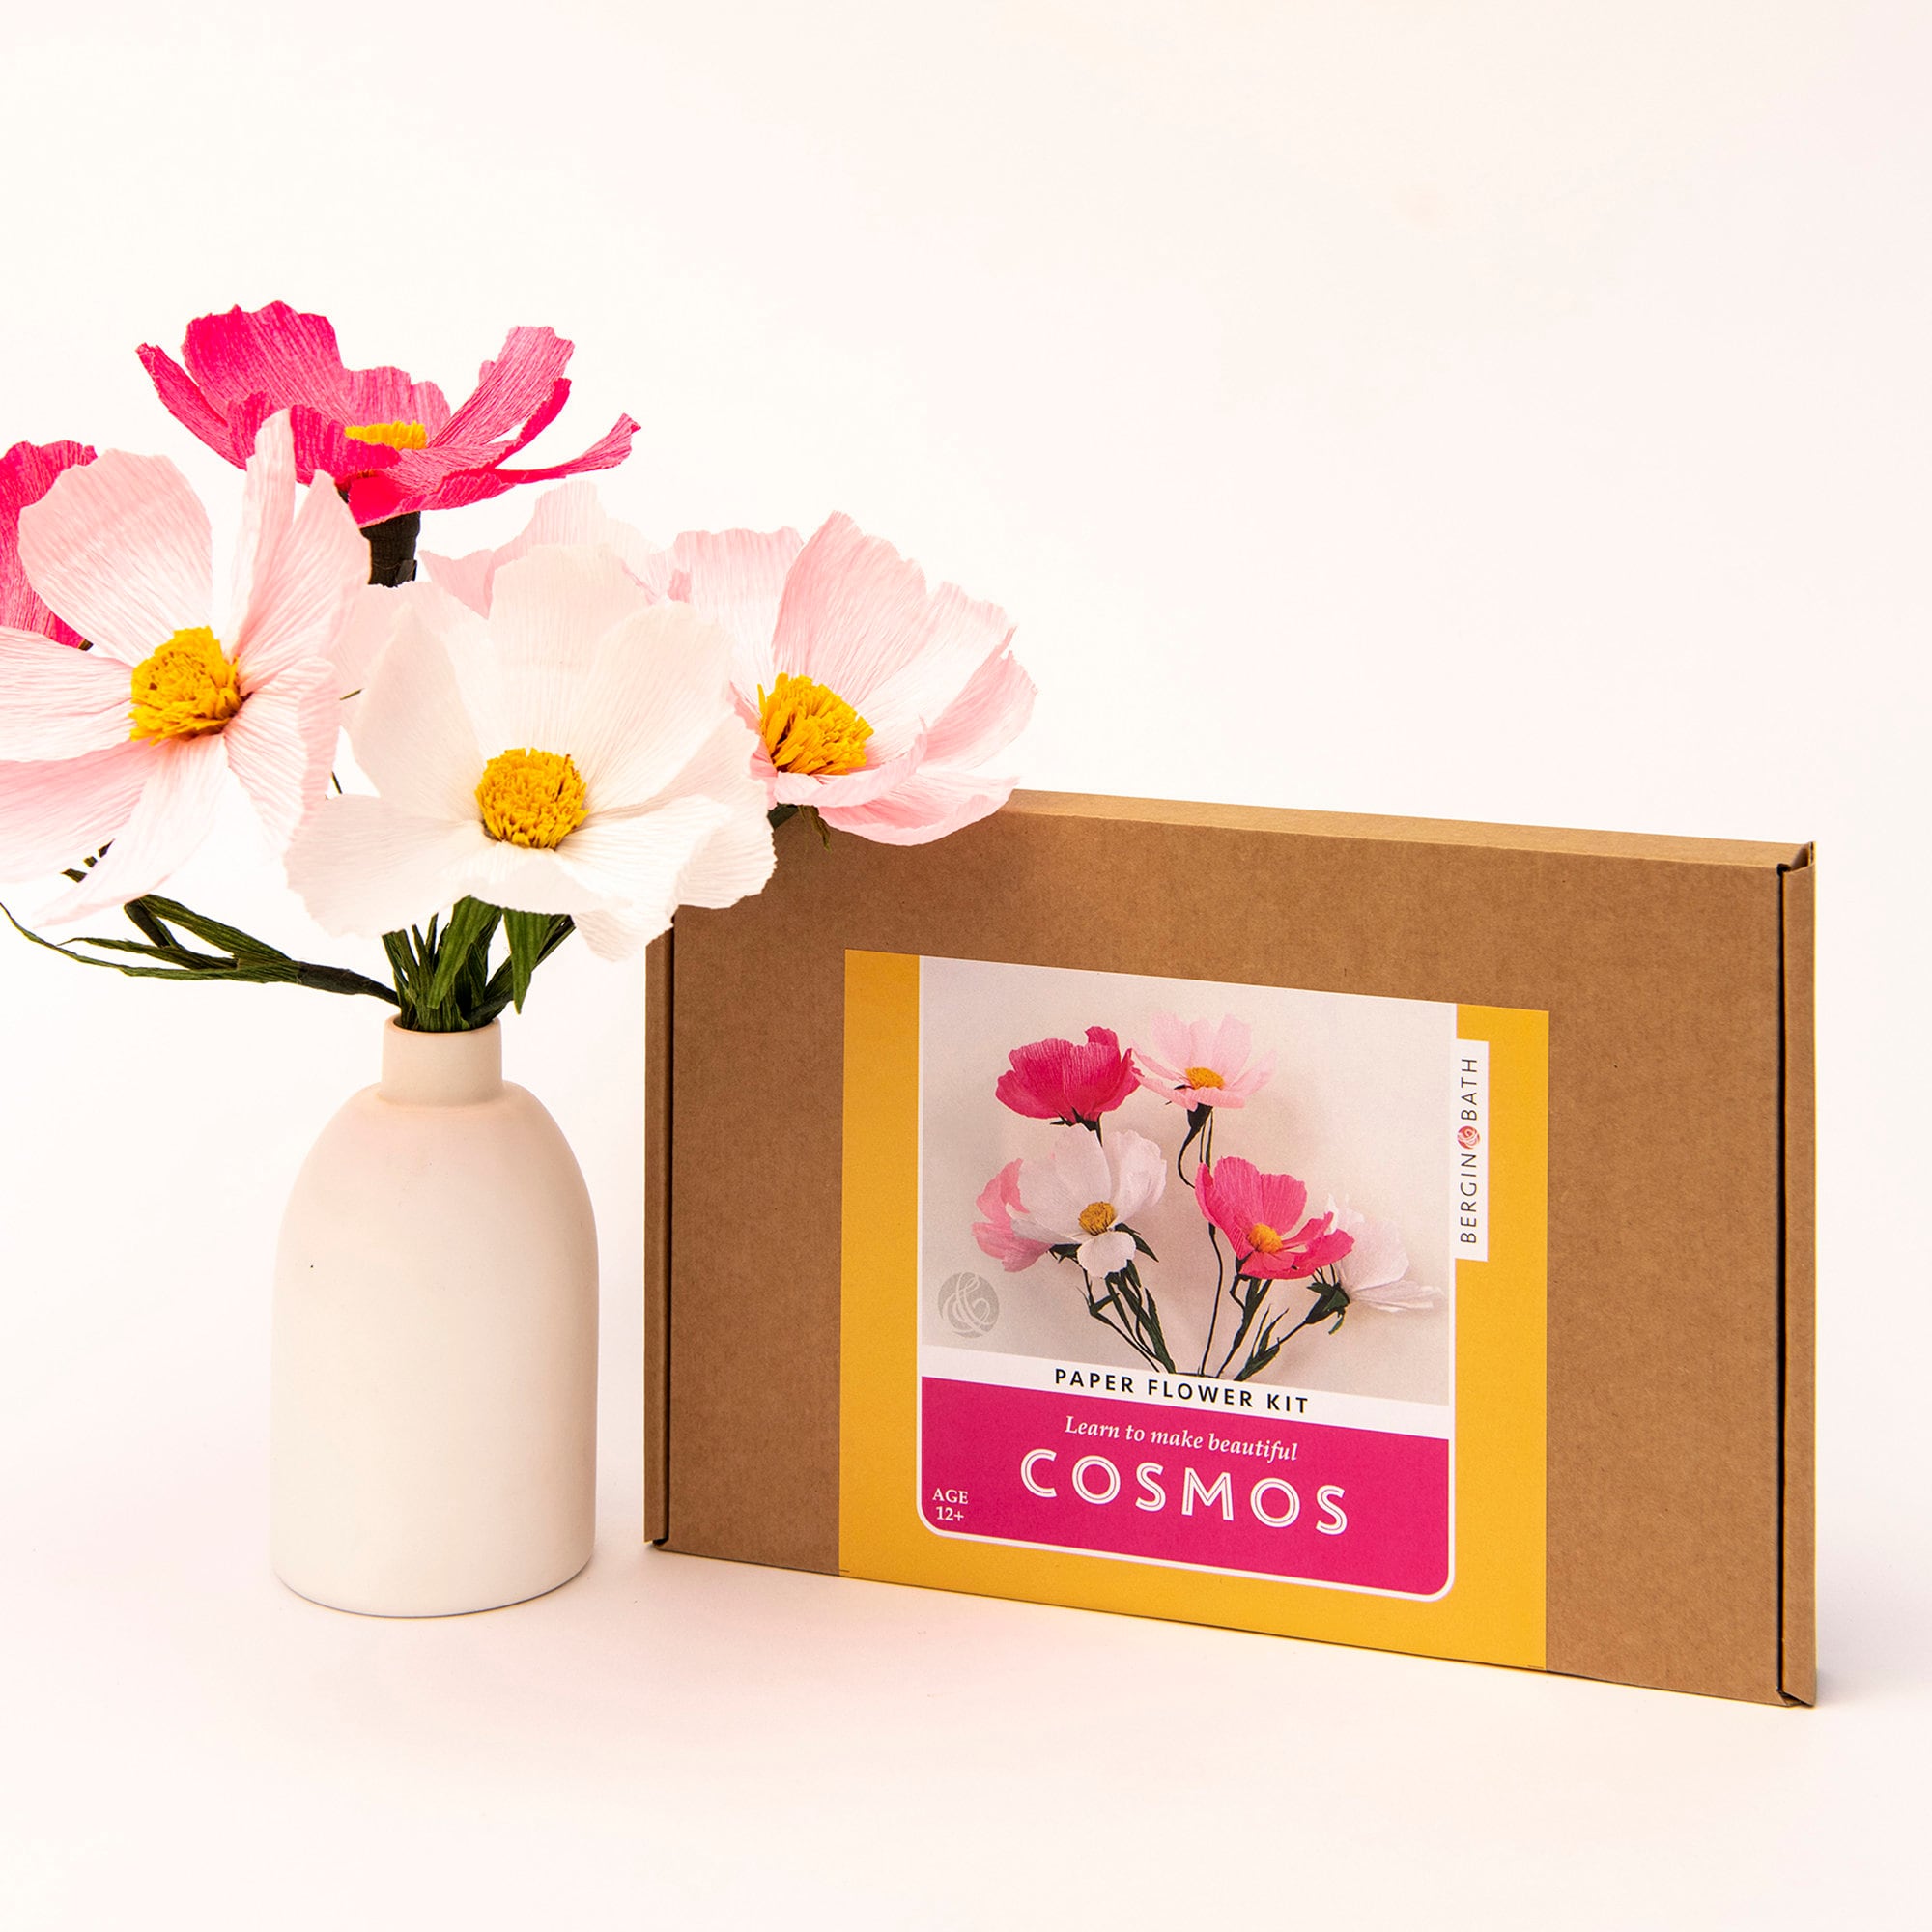 Paper Flower Kit - Cosmos. Papercraft kit for women. A creative